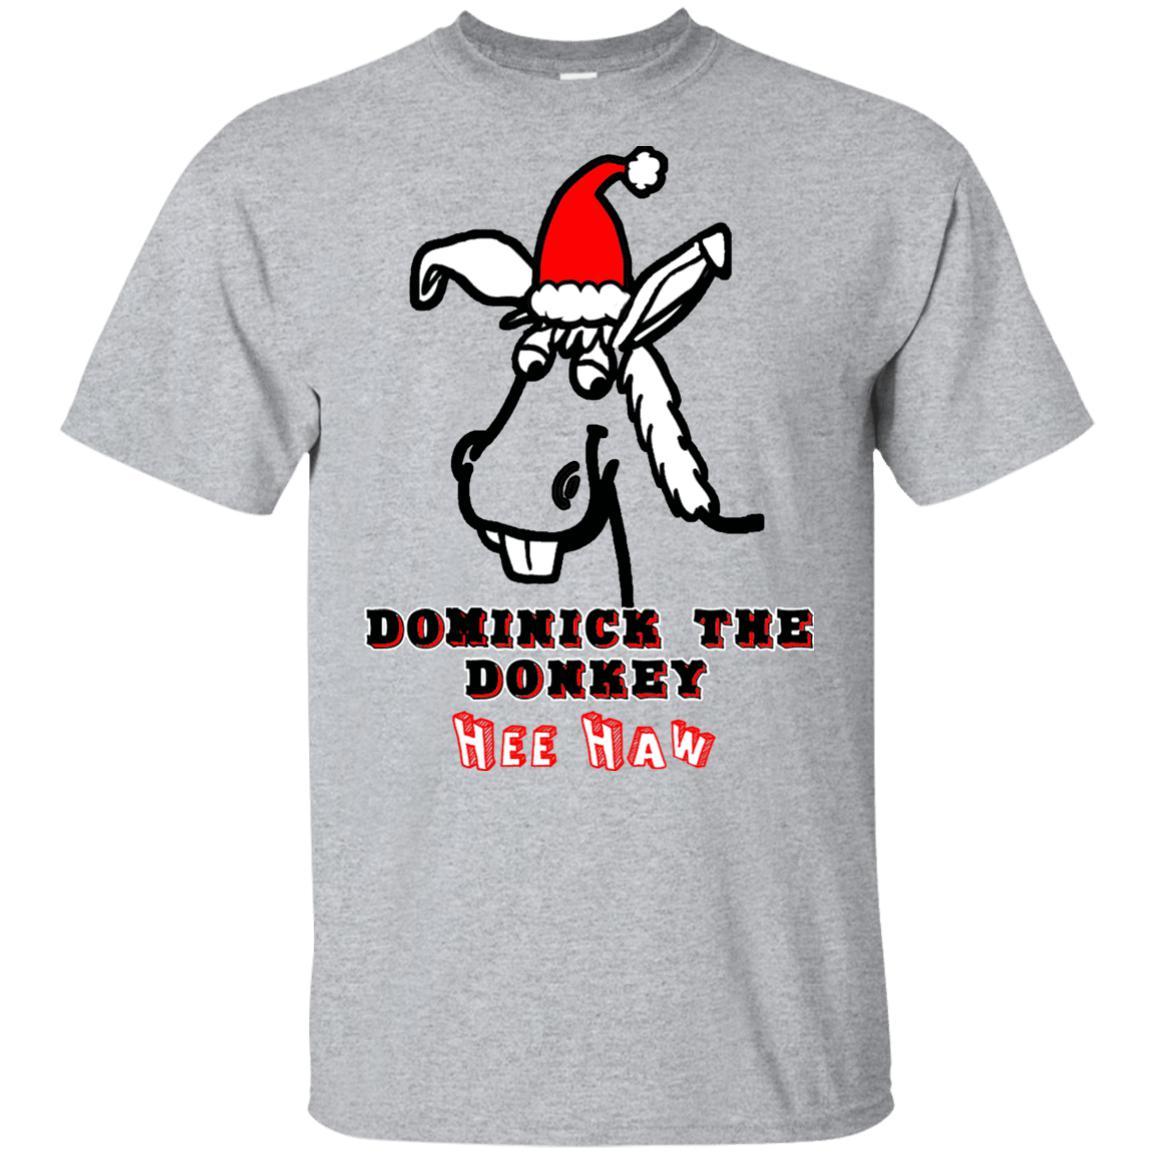 Dominick The Donkey Shirts Kids, Infants & Toddlers